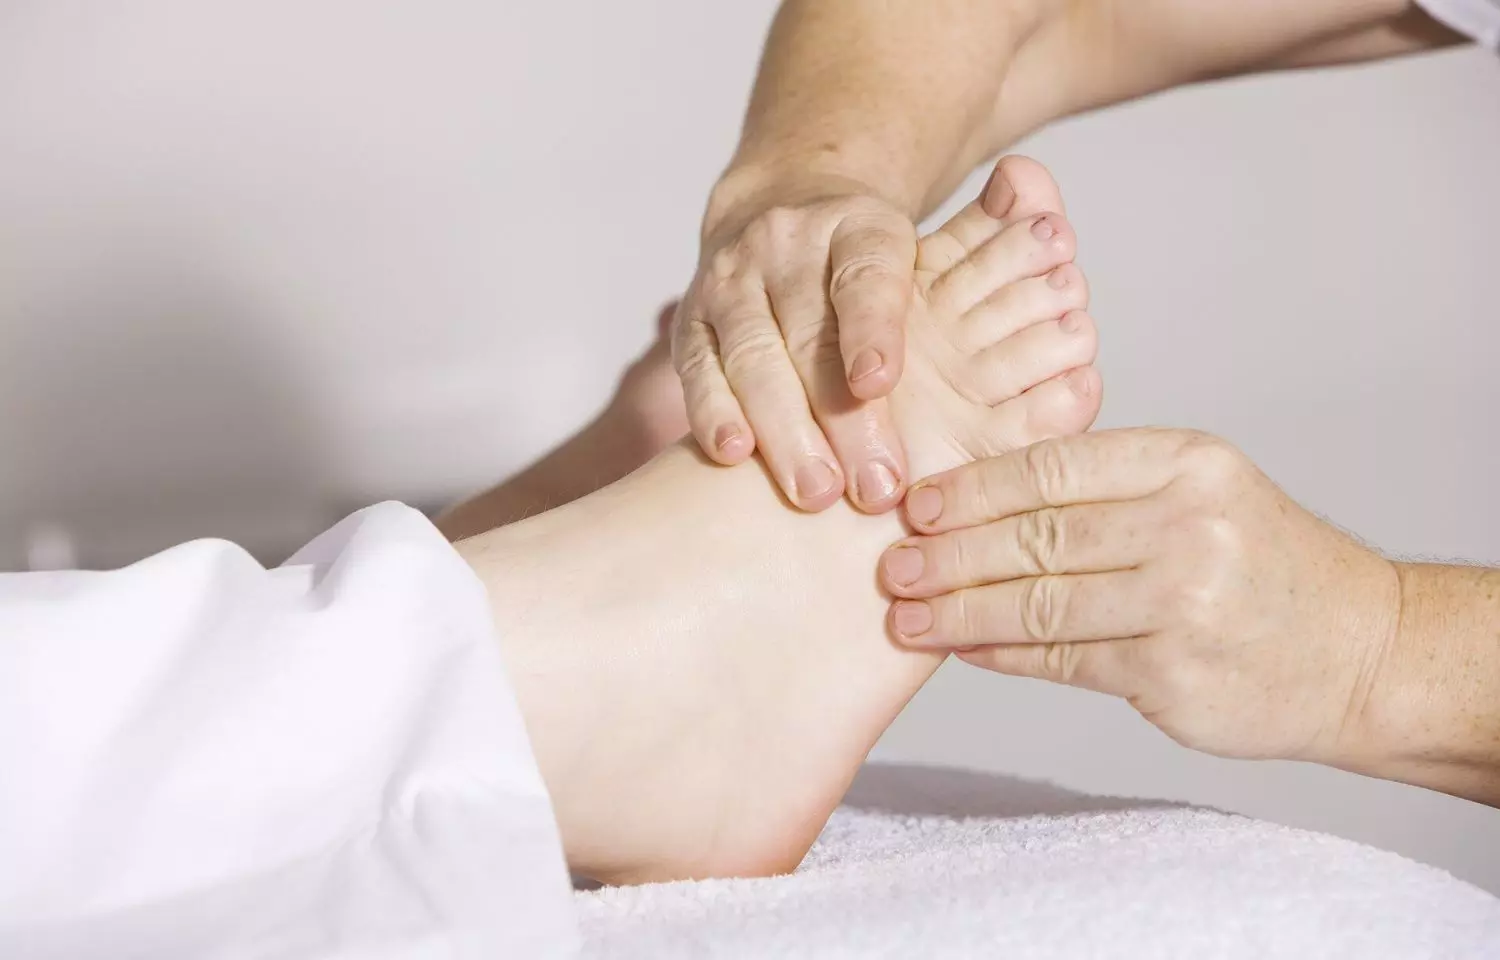 Foot Massage may Improve Sleep Quality and Anxiety in Postmenopausal Women